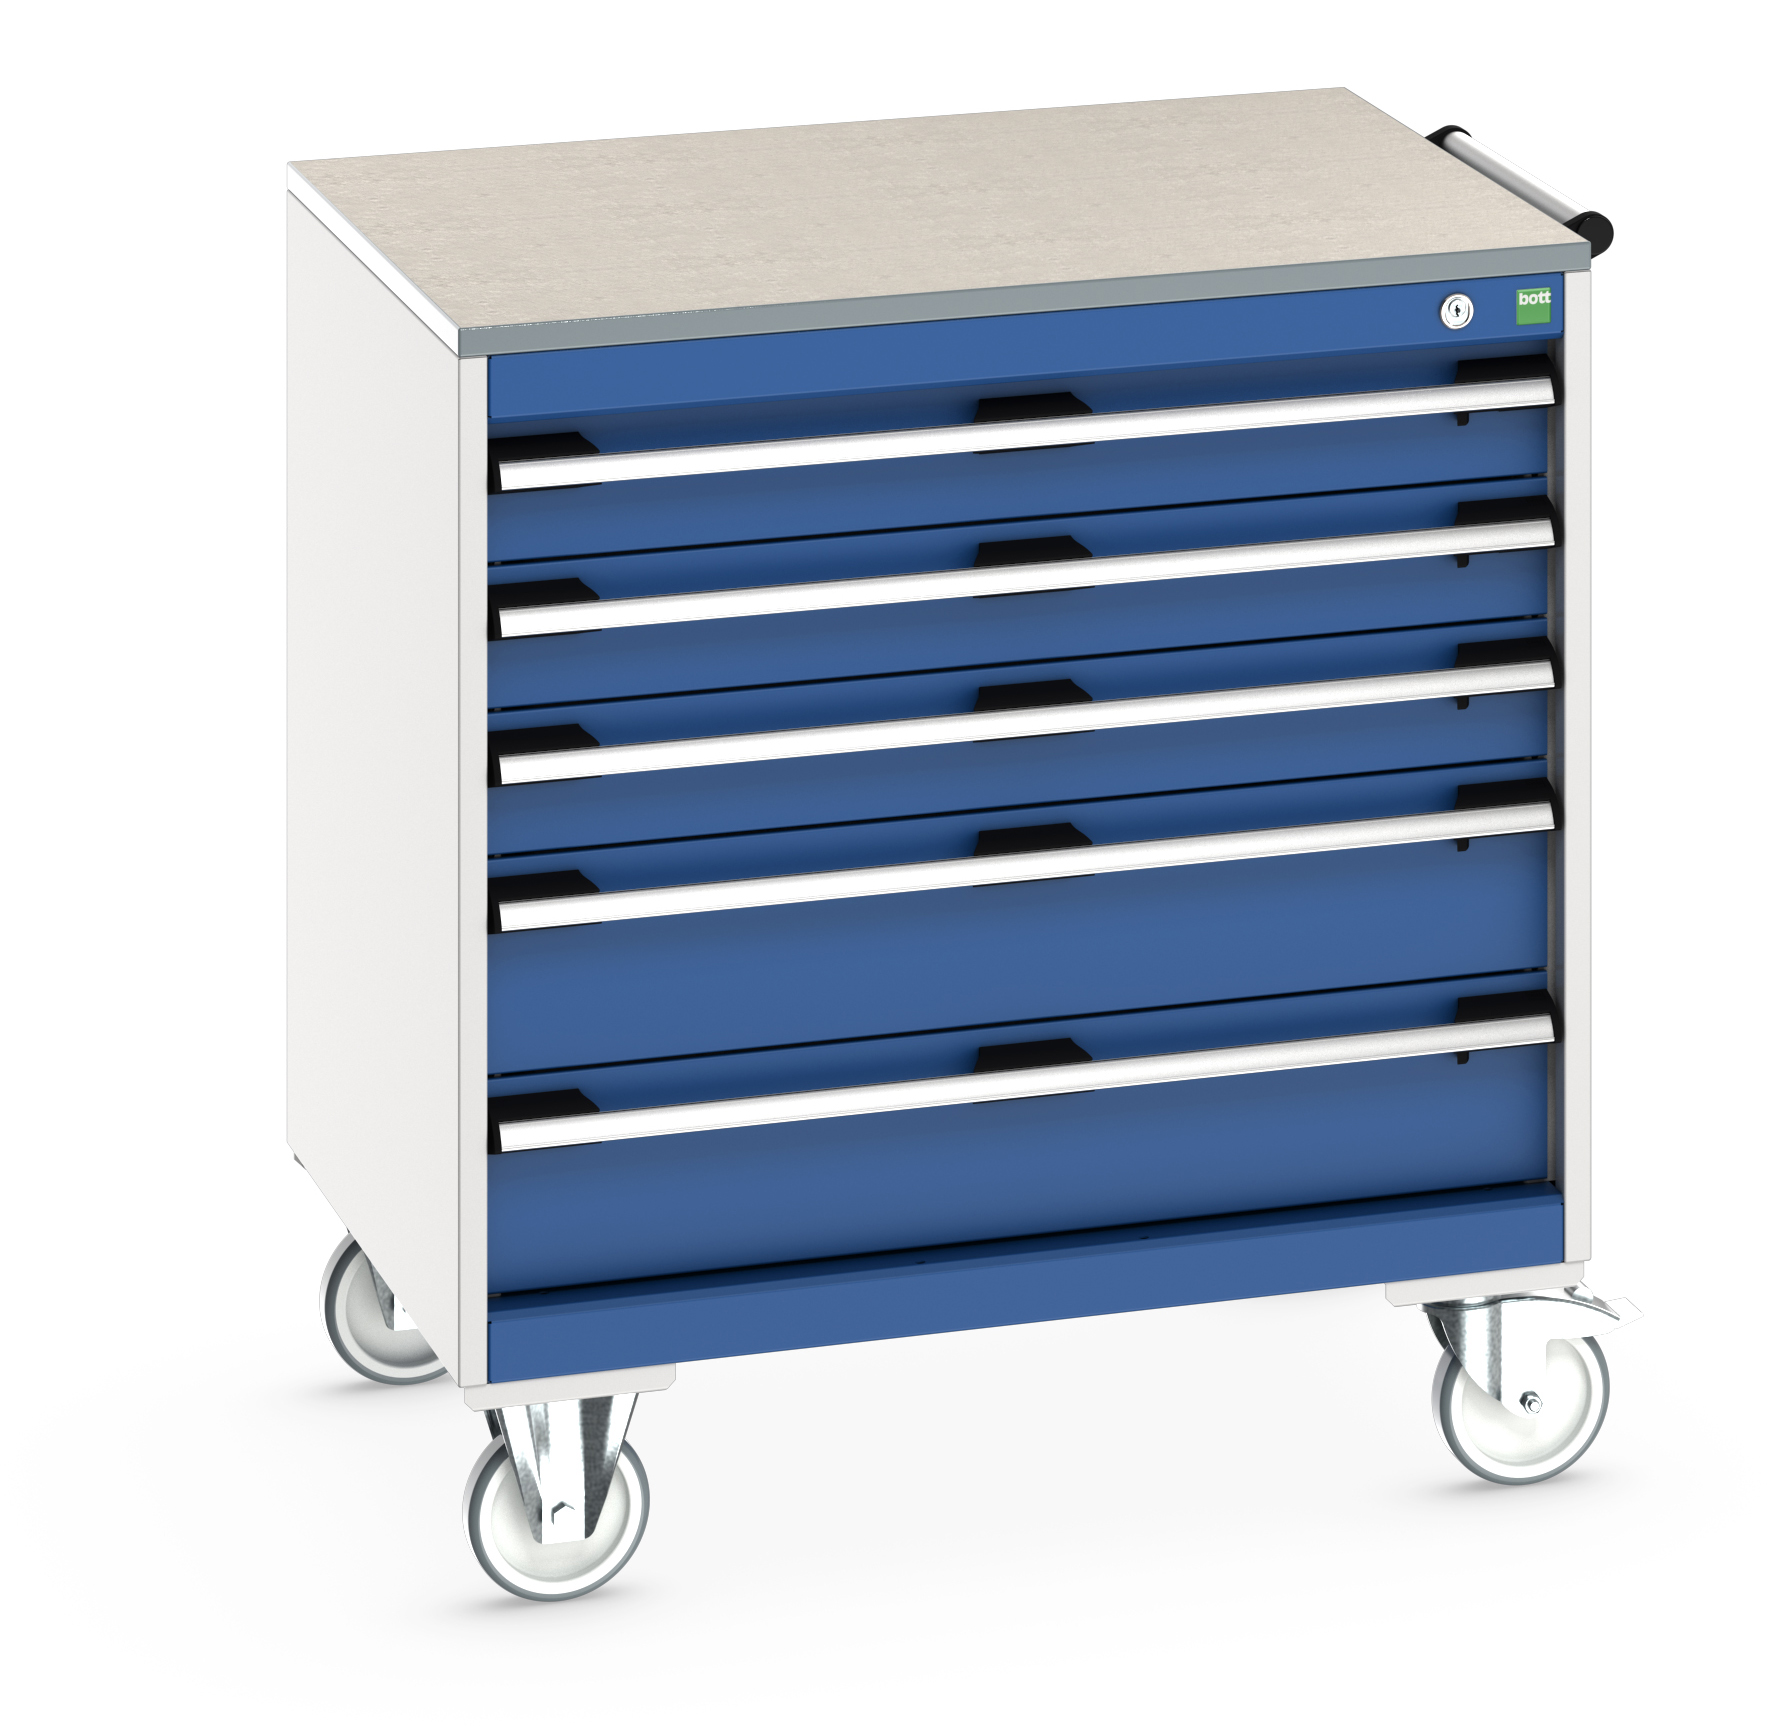 Bott Cubio Mobile Drawer Cabinet With 5 Drawers & Lino Worktop - 40402156.11V